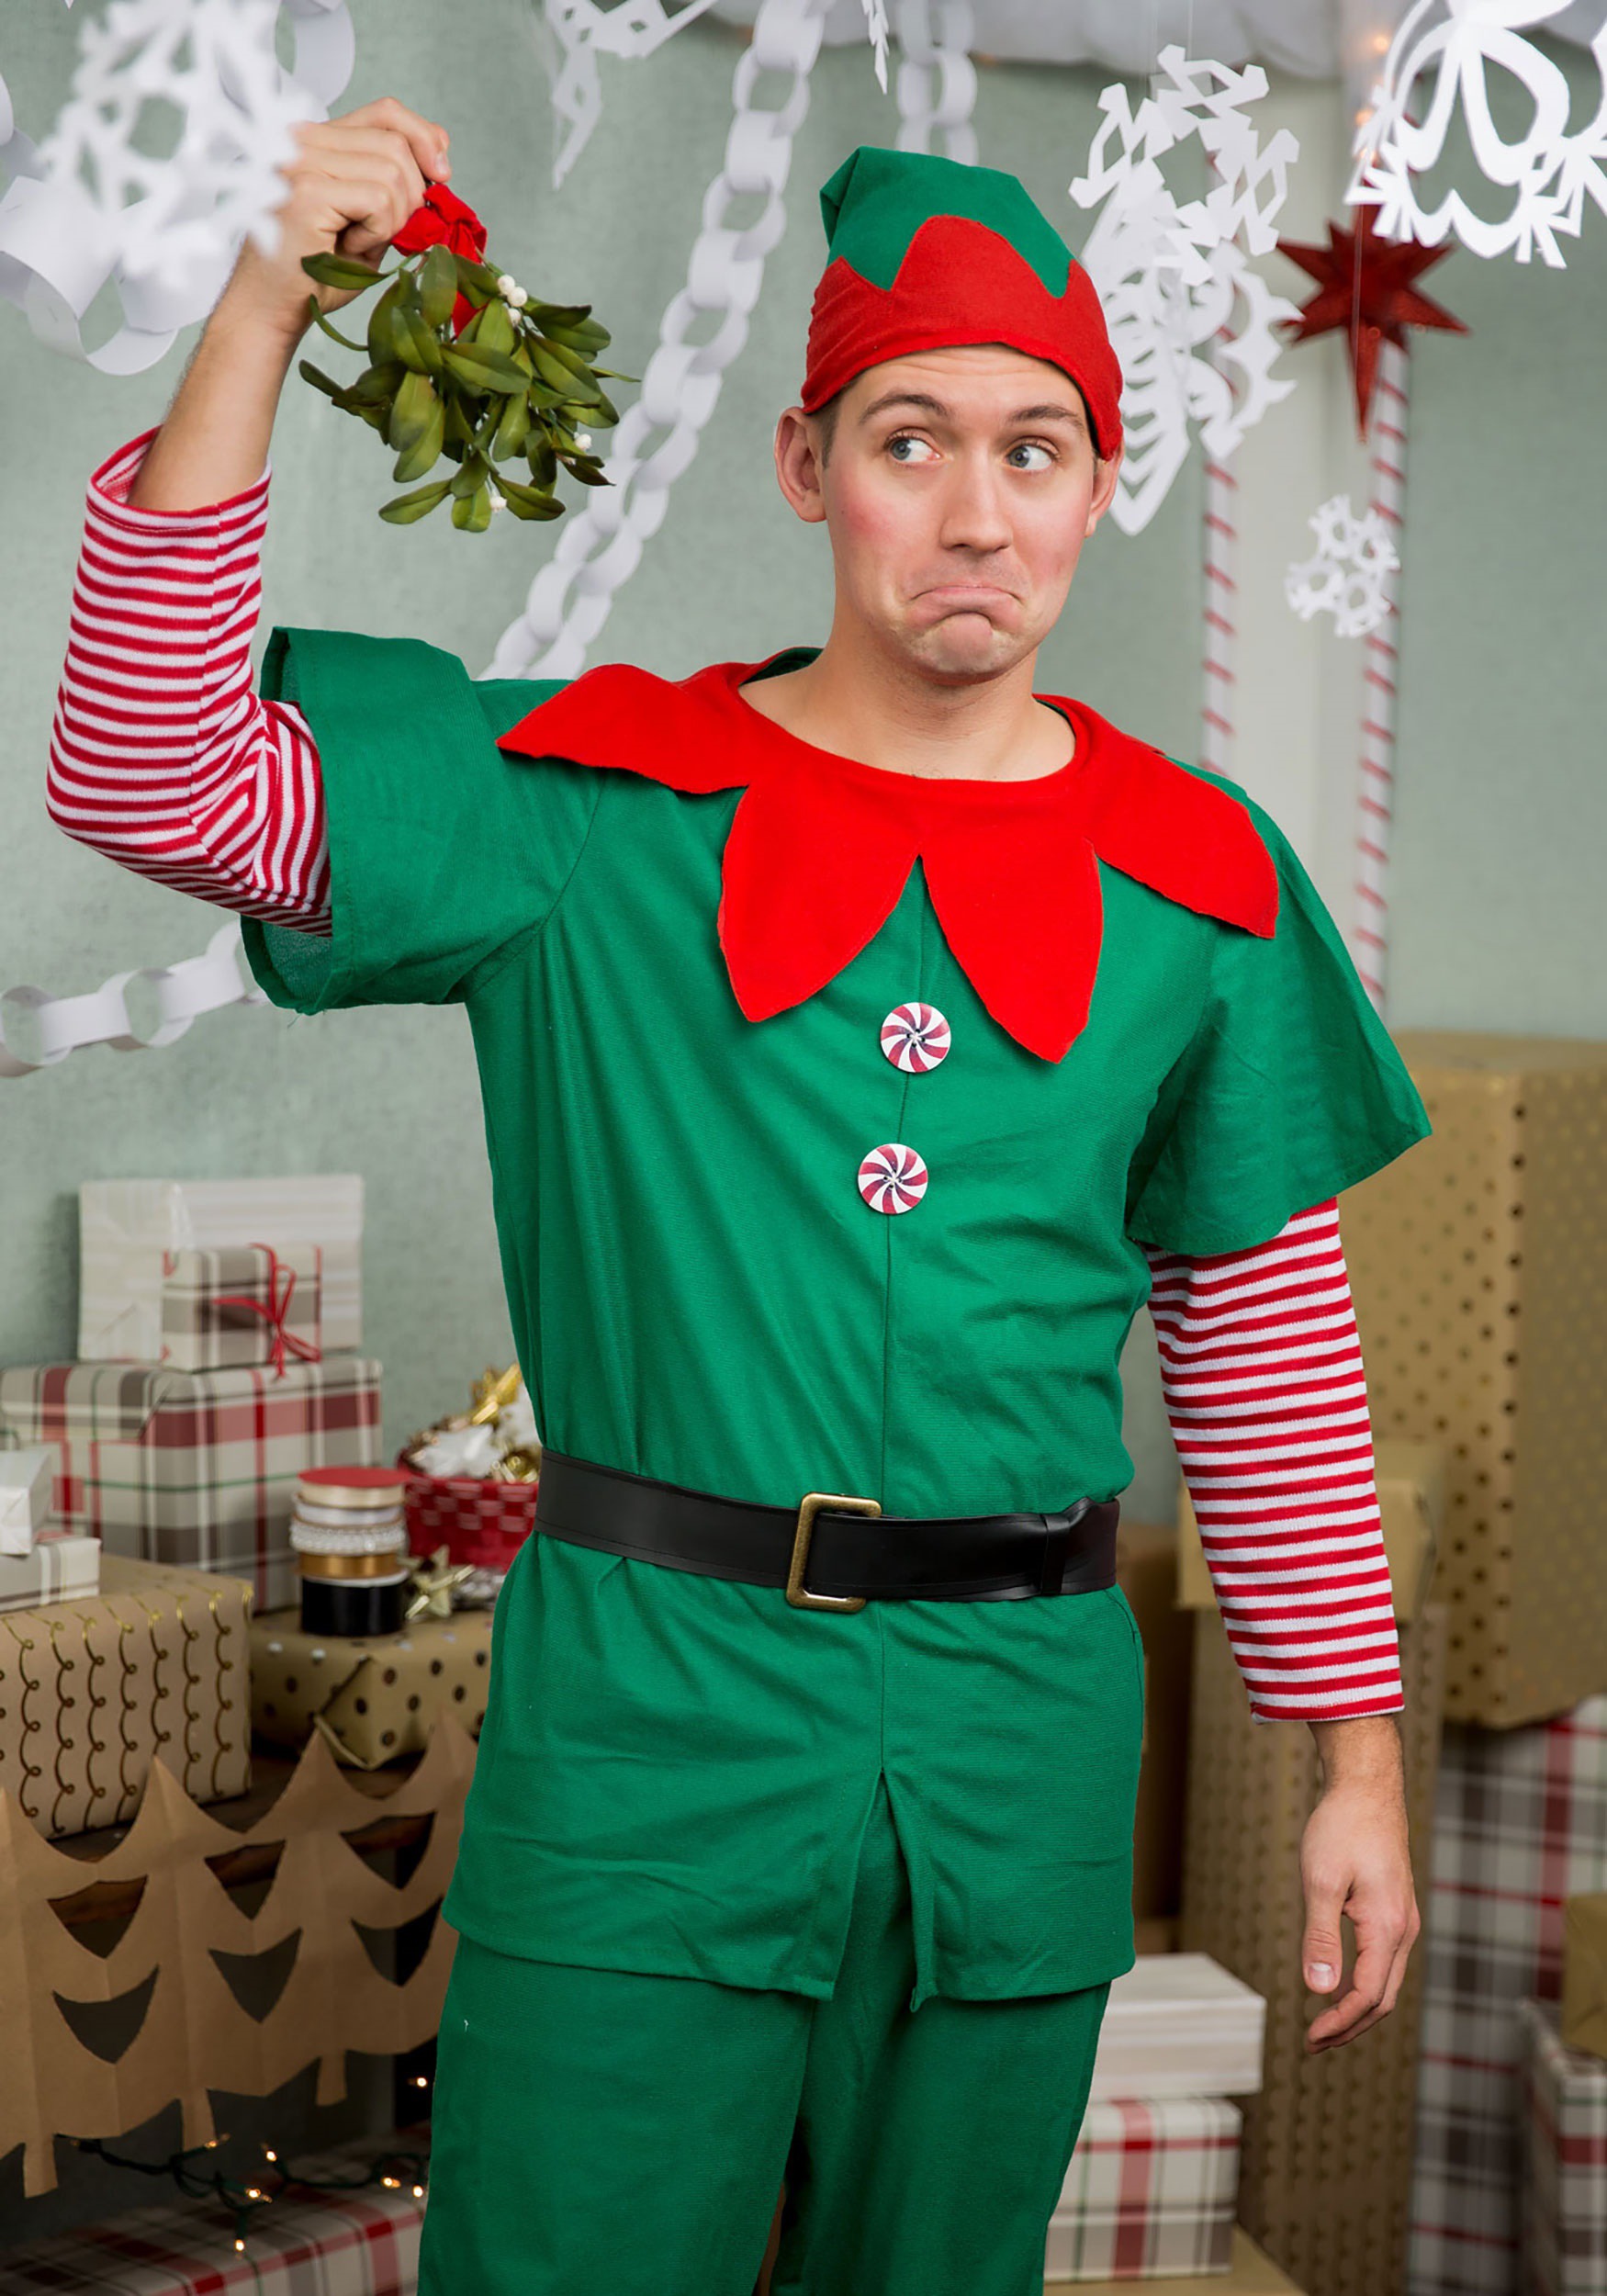 Elf Costume For Adults